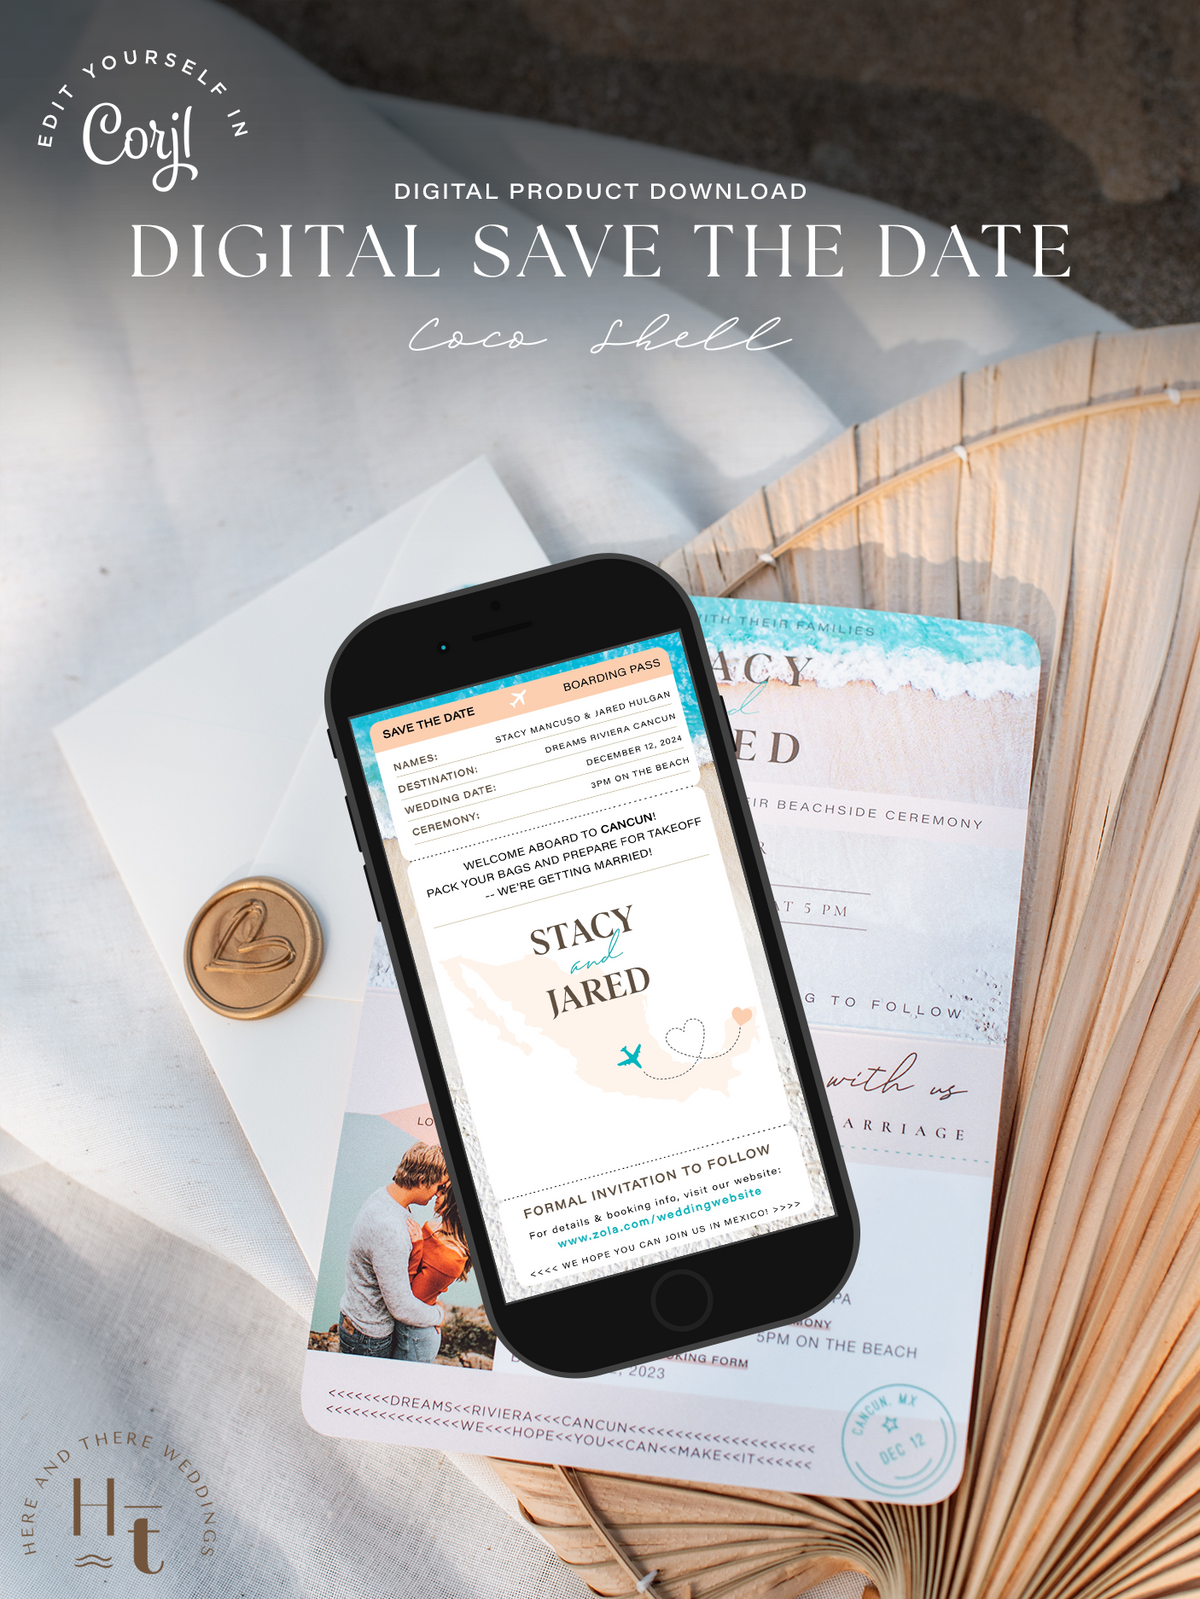 [Digital Product] Coco Shell | Digital Save The Date Boarding Pass